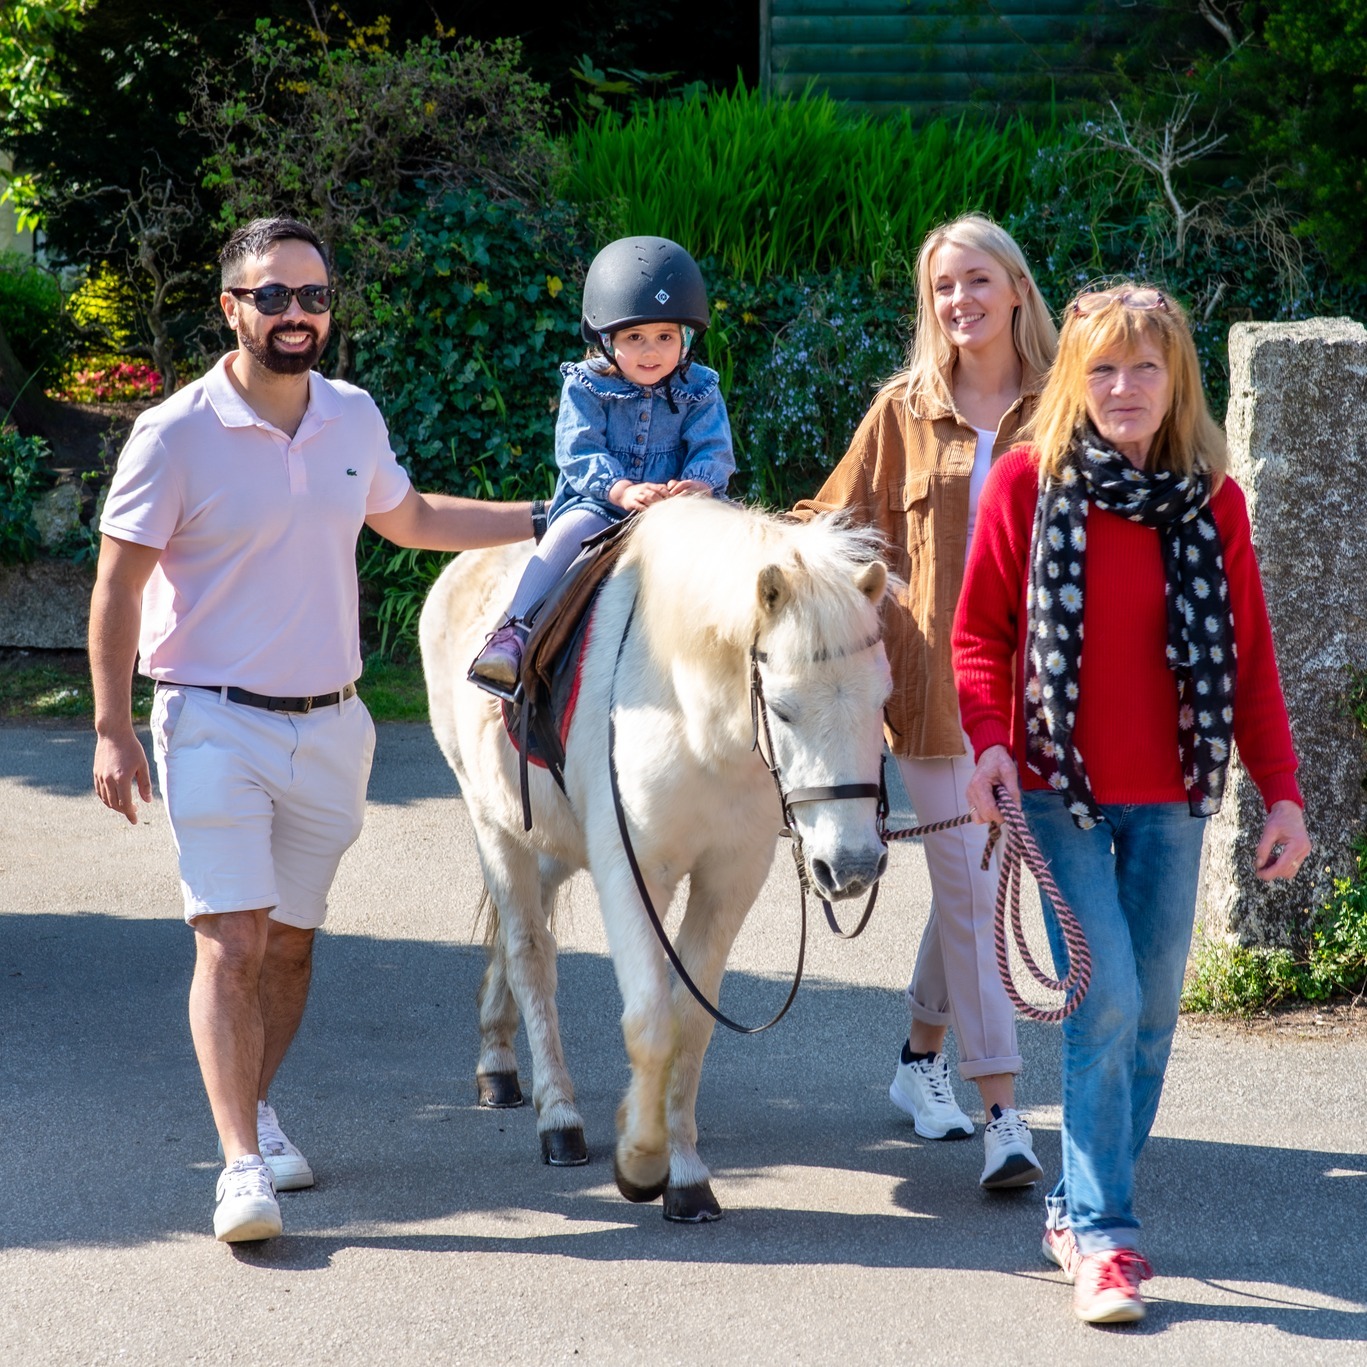 Cornwall kids holidays with pony rides